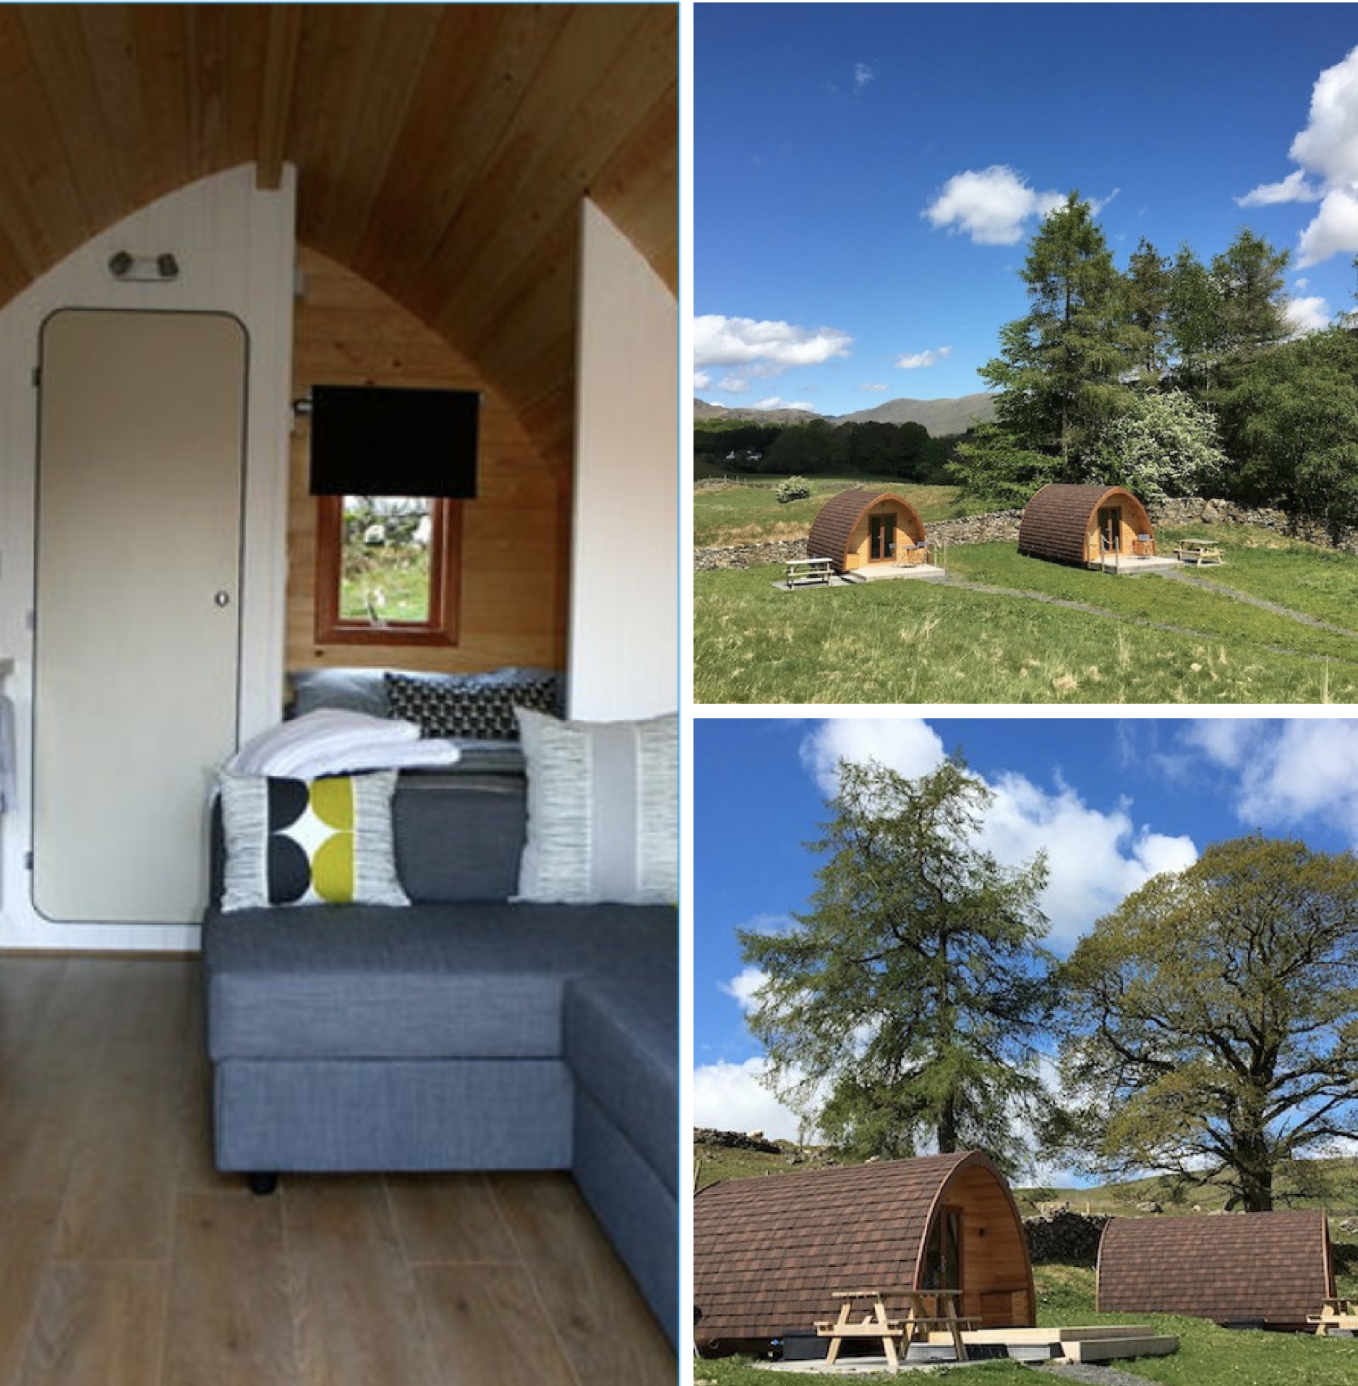 camping pods to rent off the beaten track in beautiful rural Cumbria